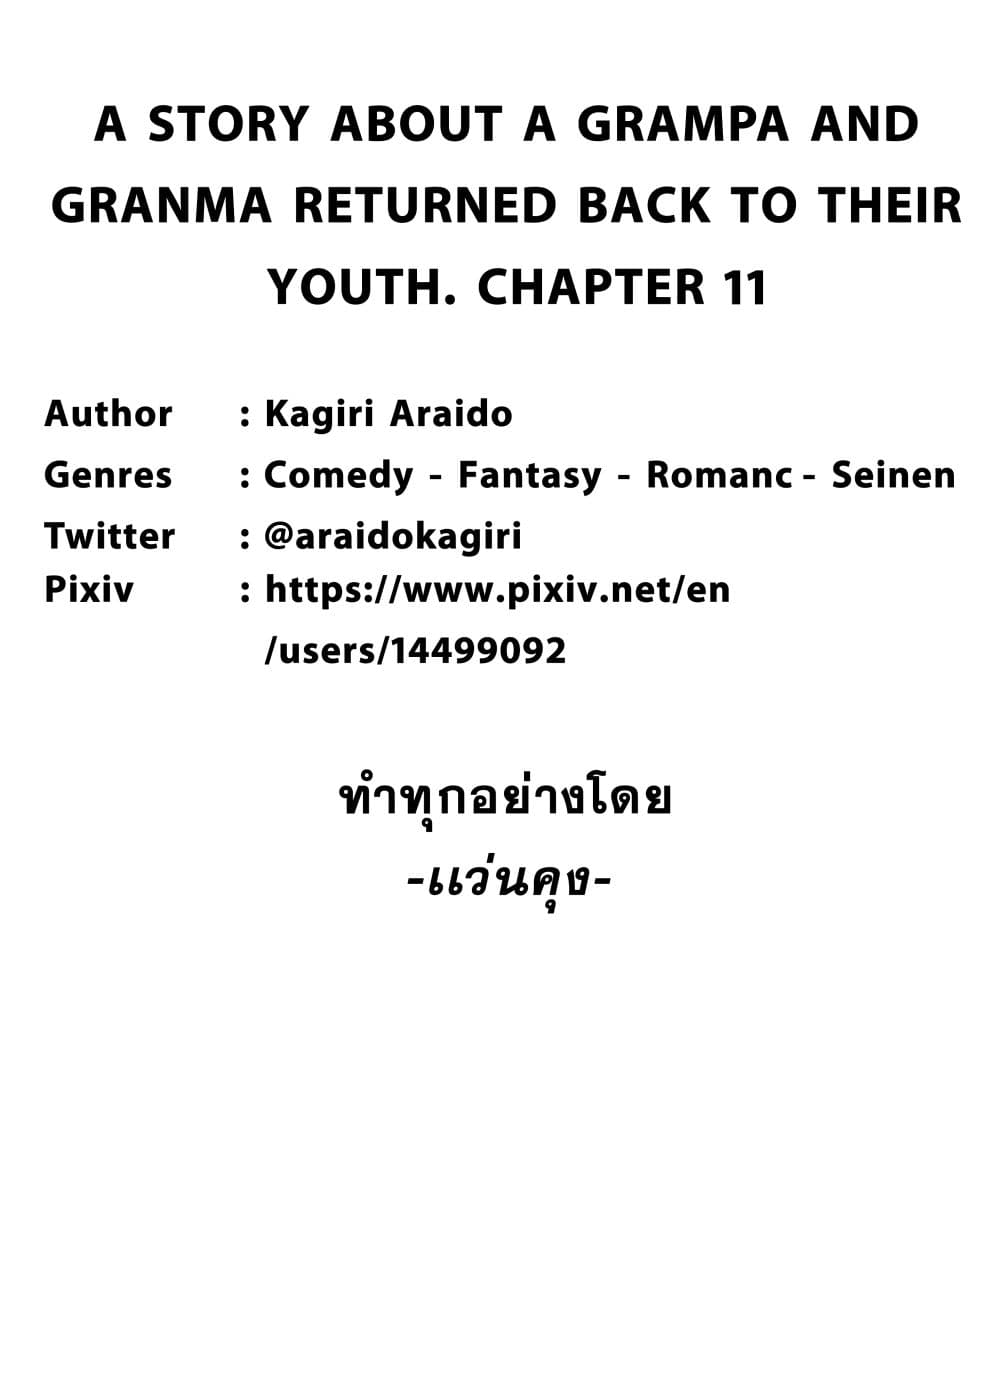 A Story About A Grampa and Granma Returned Back to their Youth คู่รักวัยดึกหวนคืนวัยหวาน 11-11